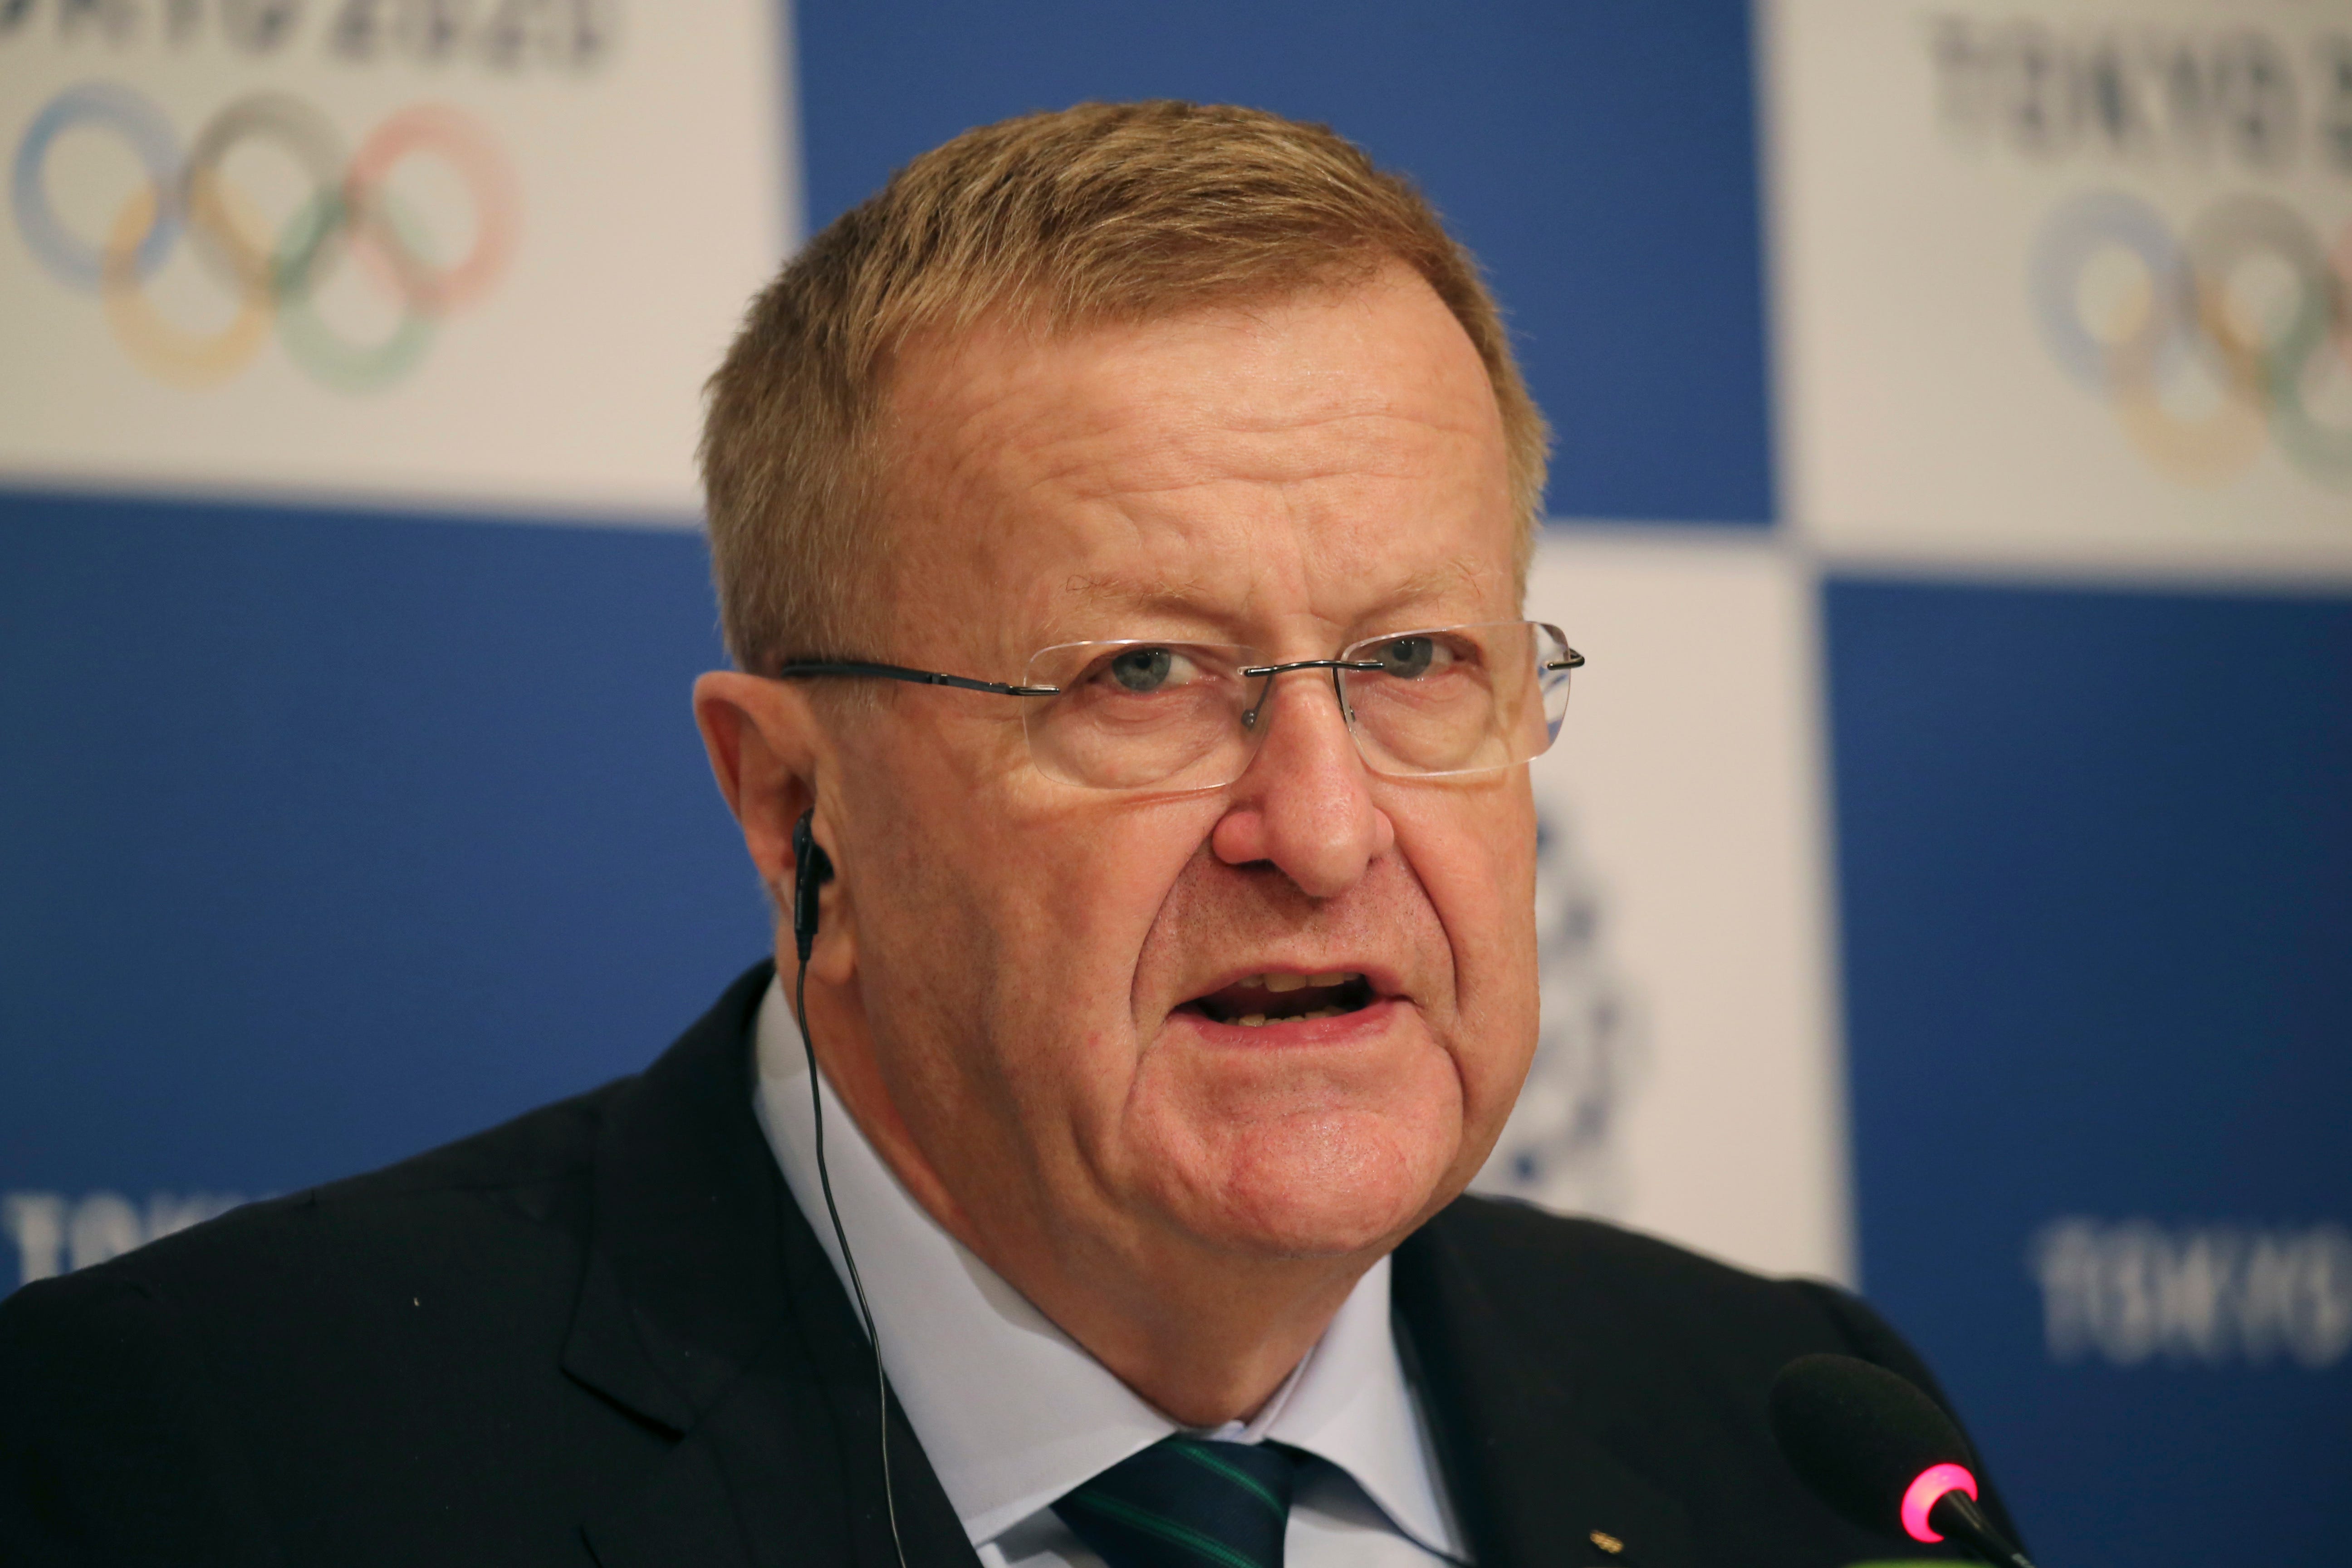 Gold medalist Roche to challenge IOC VP Coates in elections